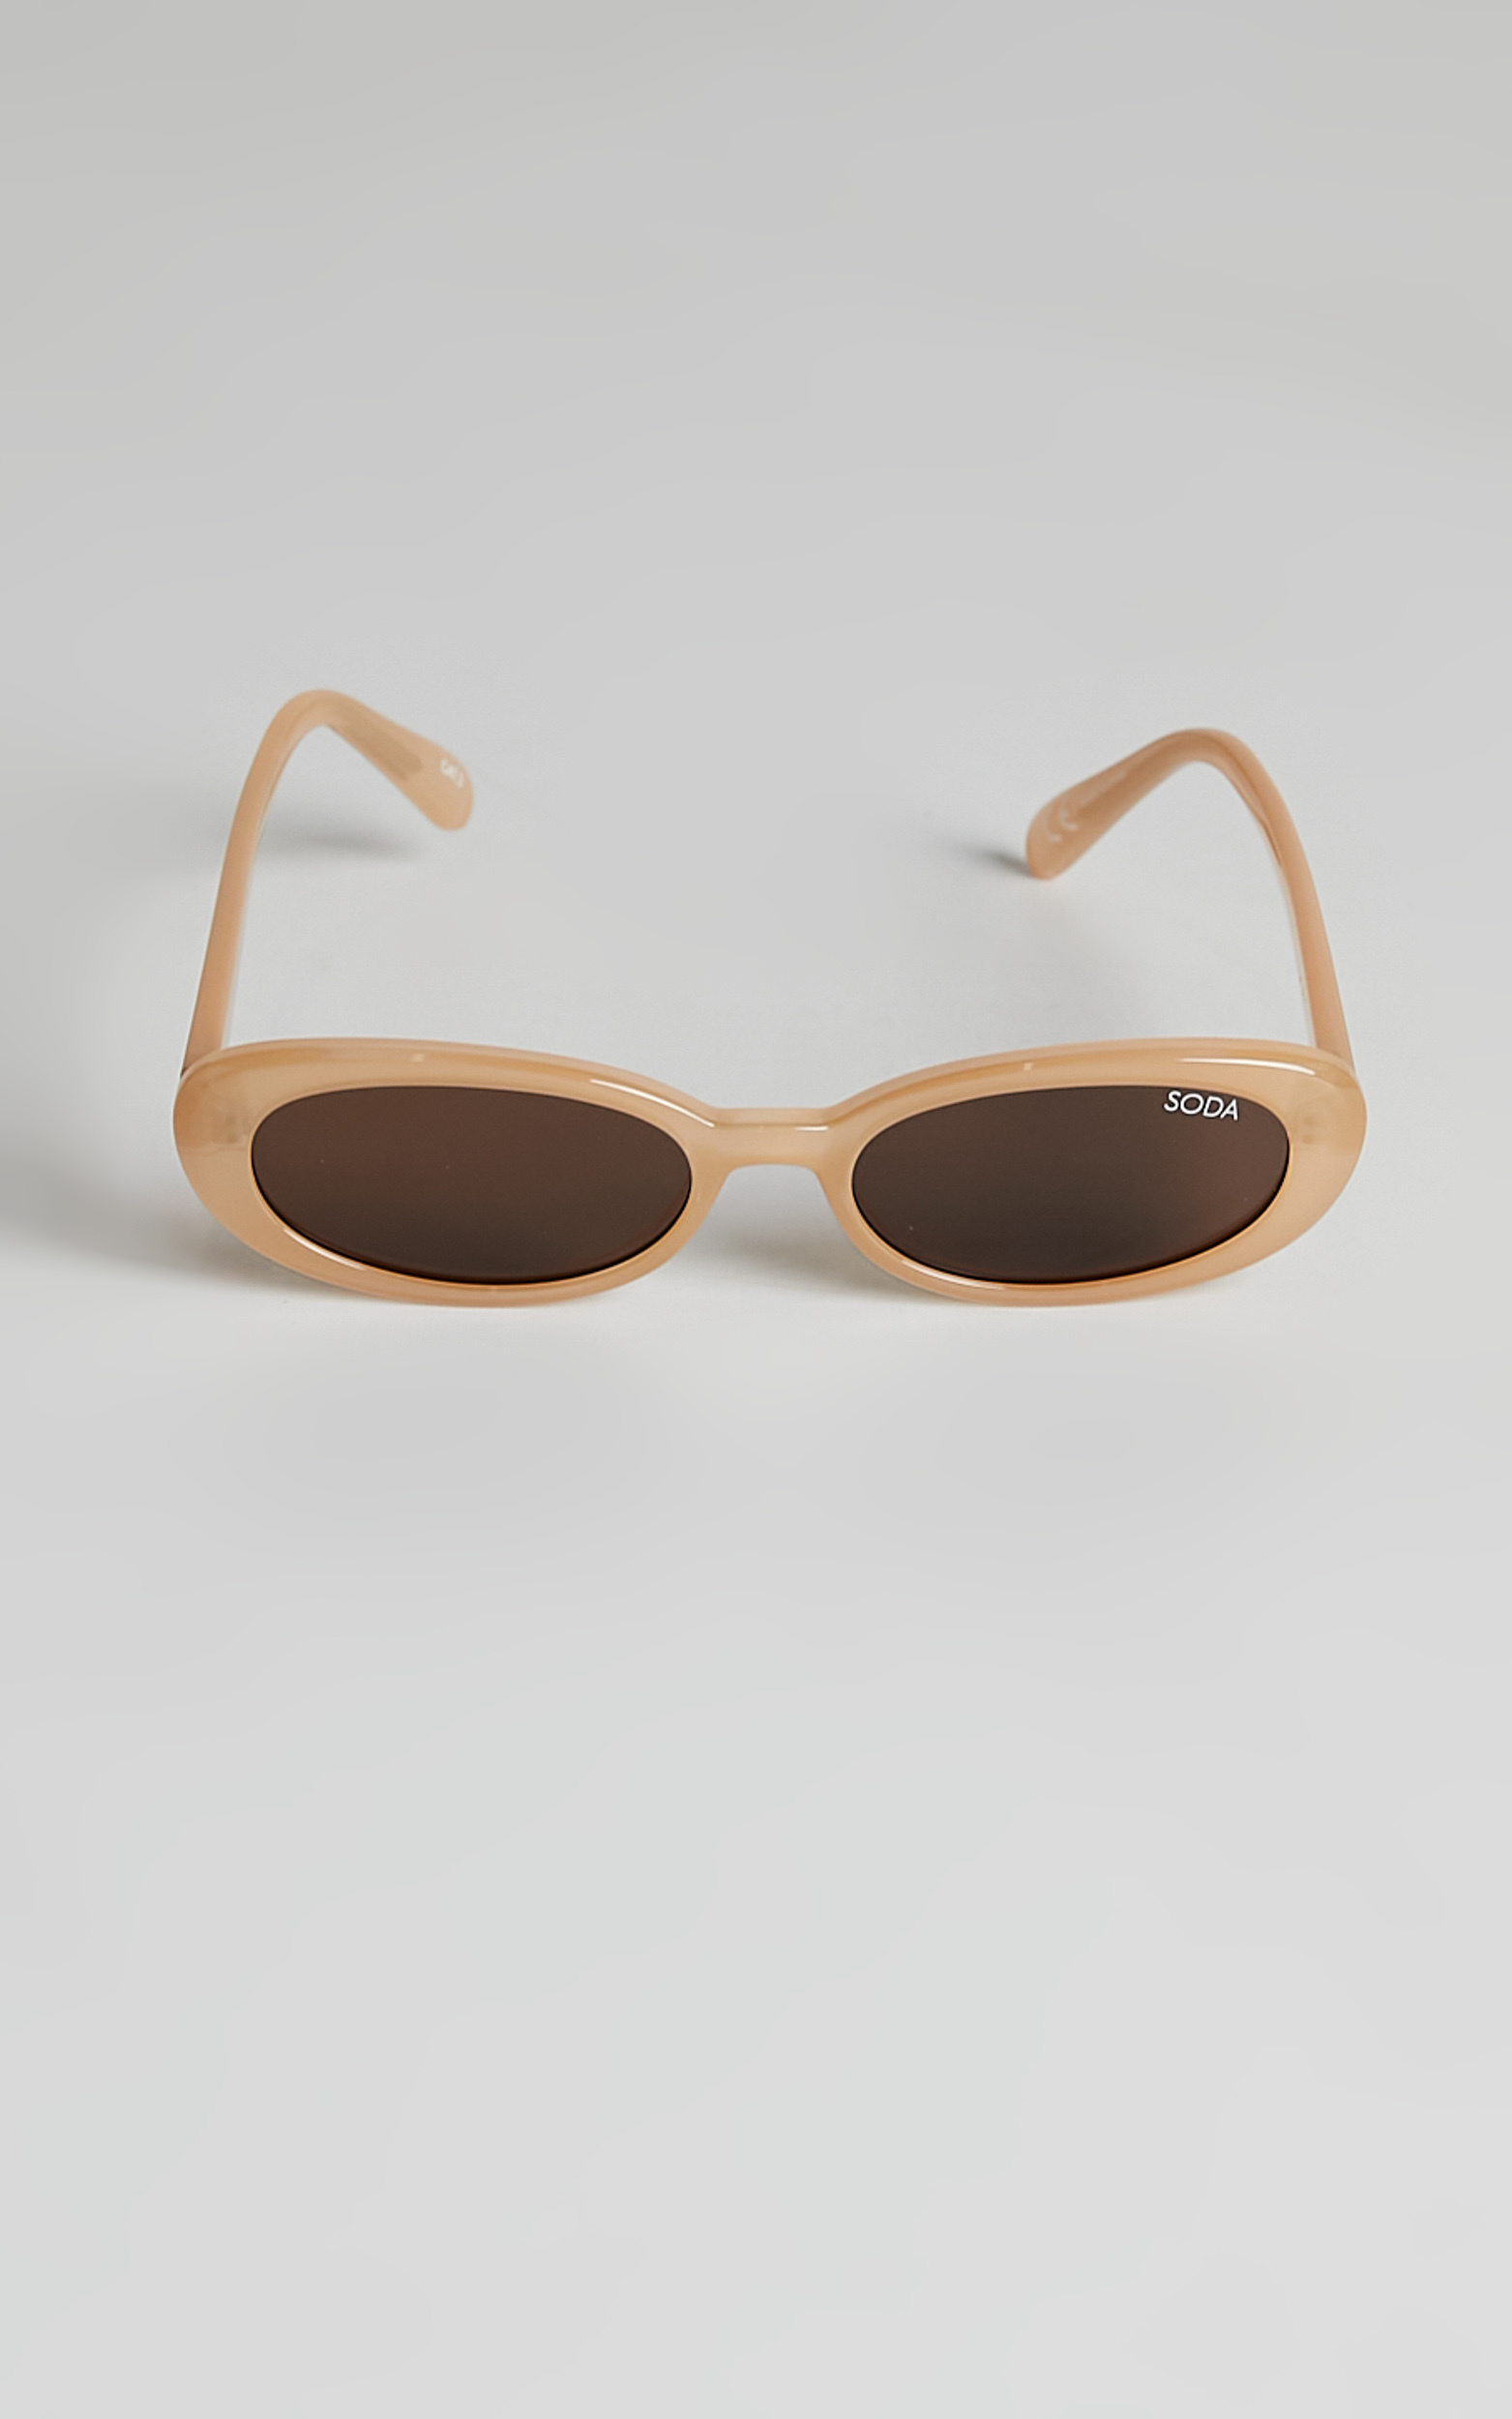 Soda Shades - GG Sunglasses in Blush - NoSize, PNK1, hi-res image number null